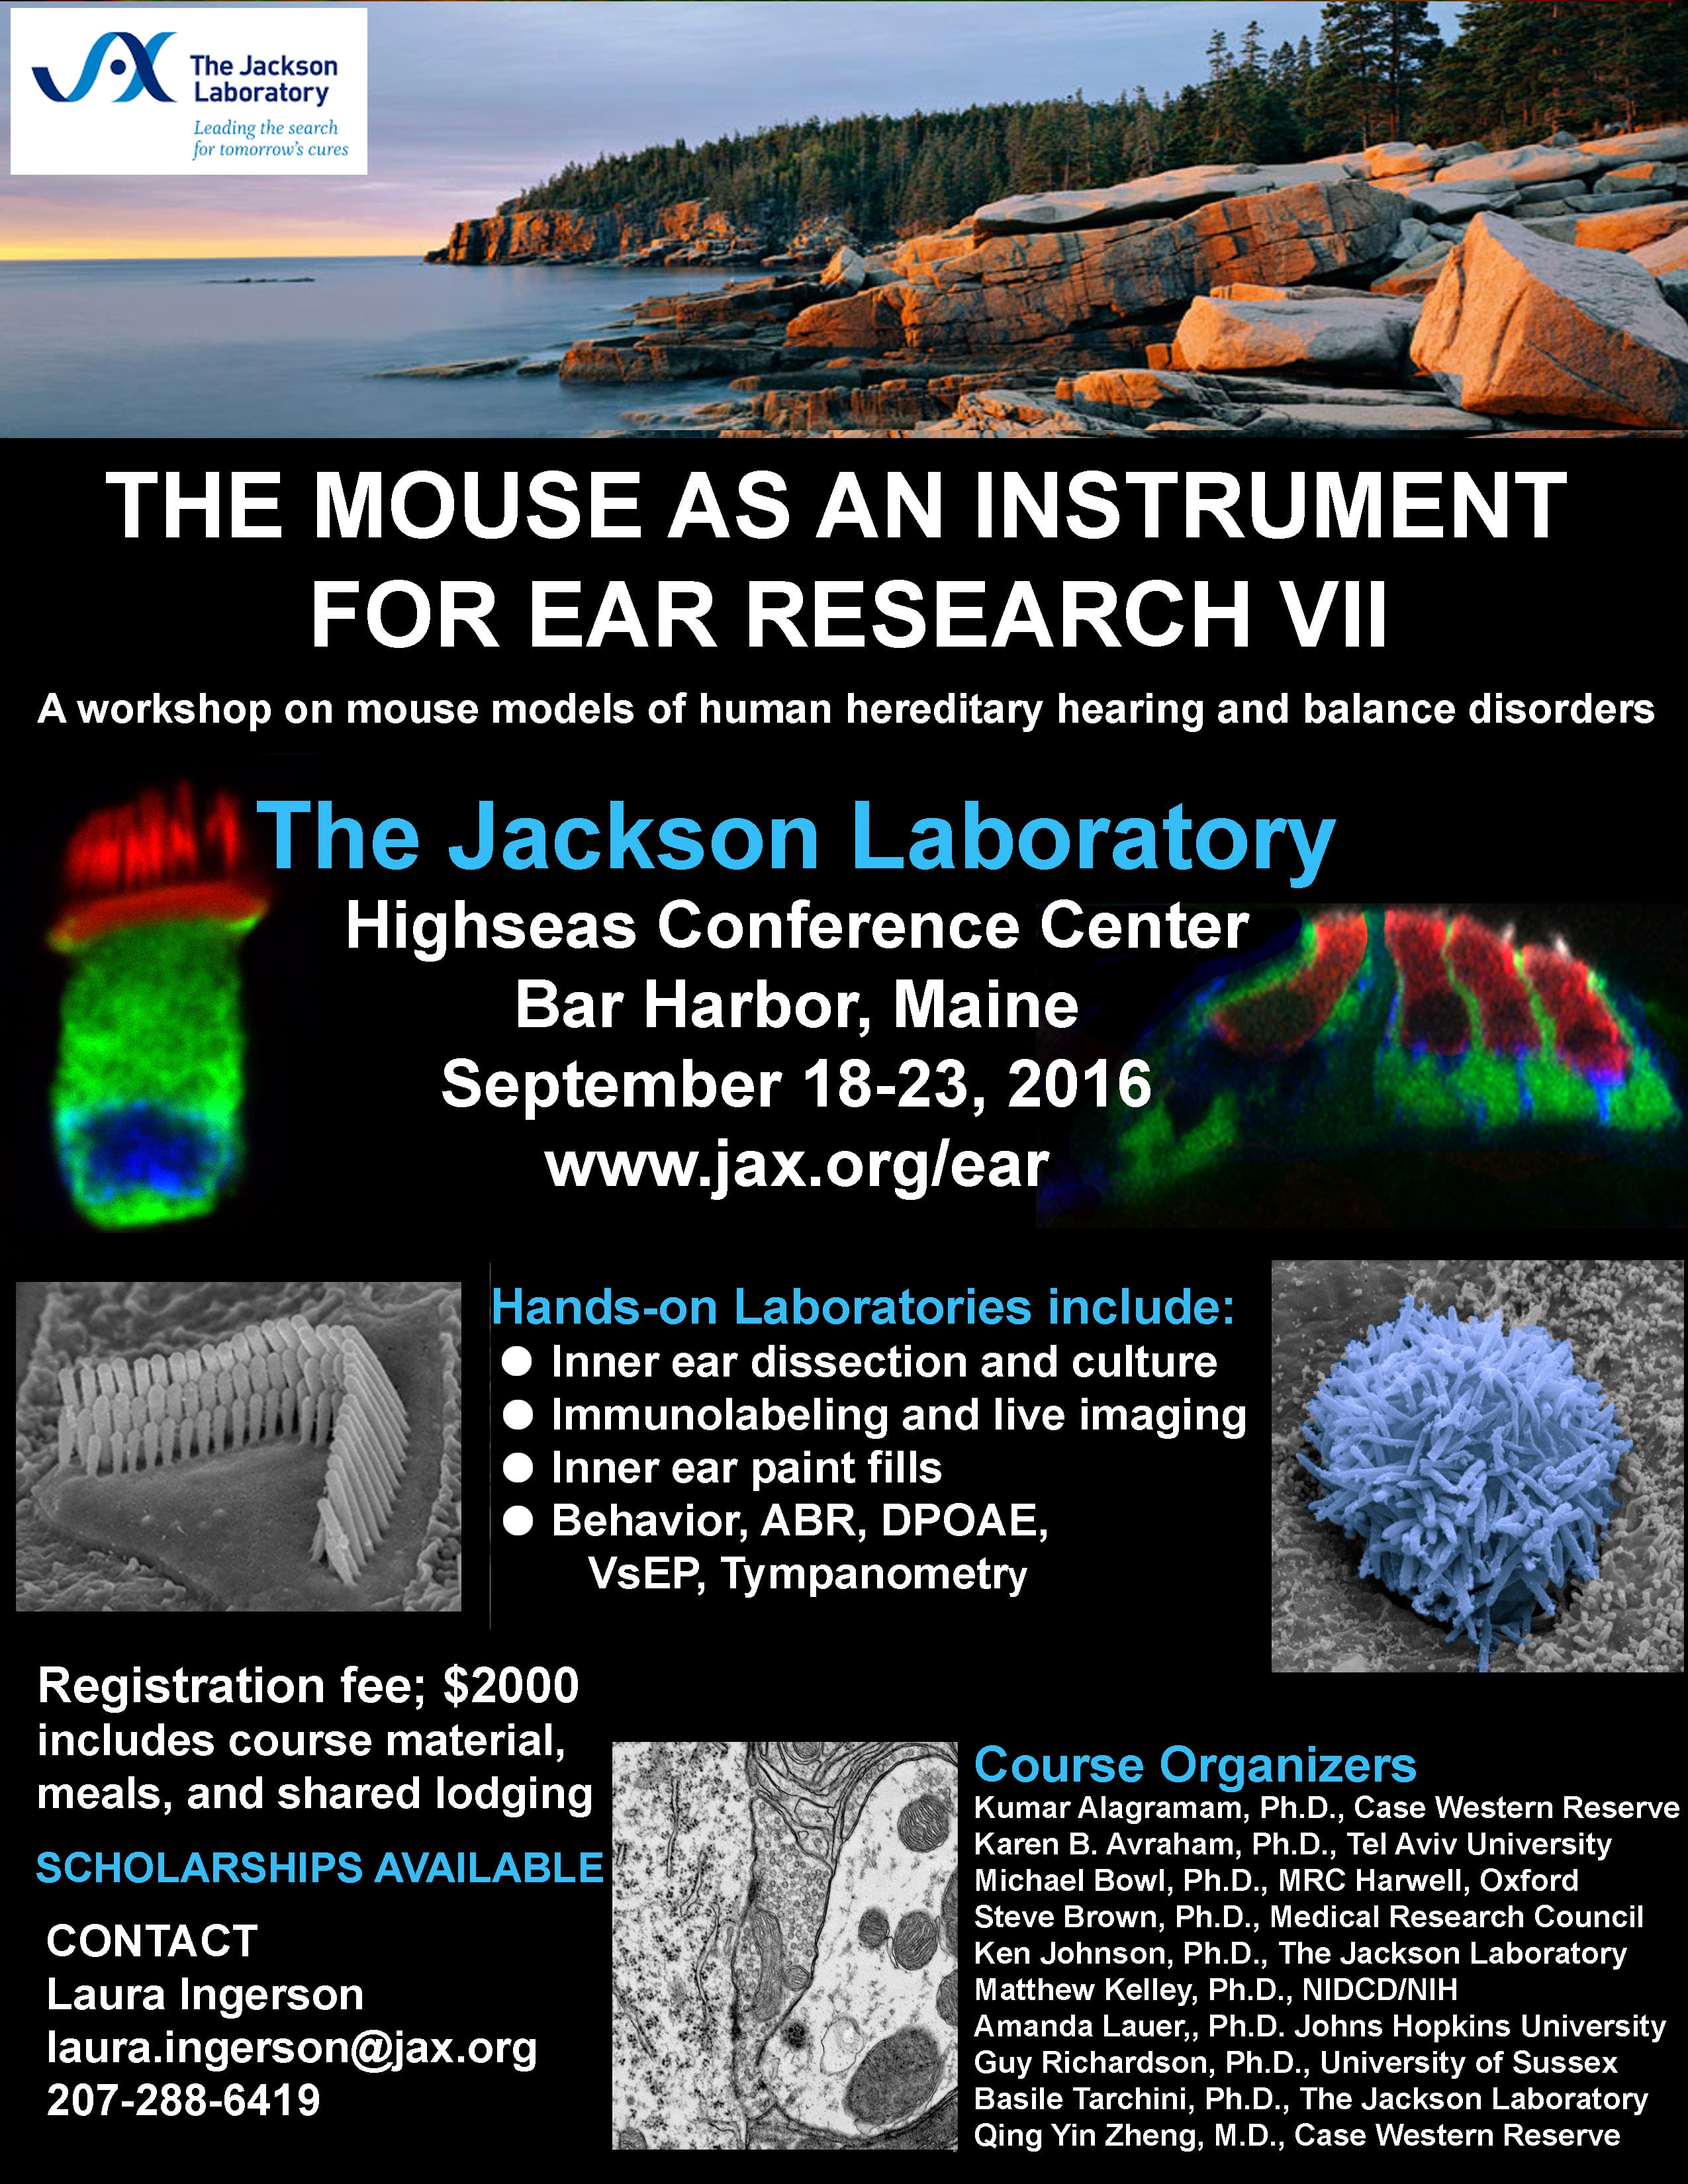 The Mouse as an Instrument for Ear Research VII - The Jackson Laboratory Workshop